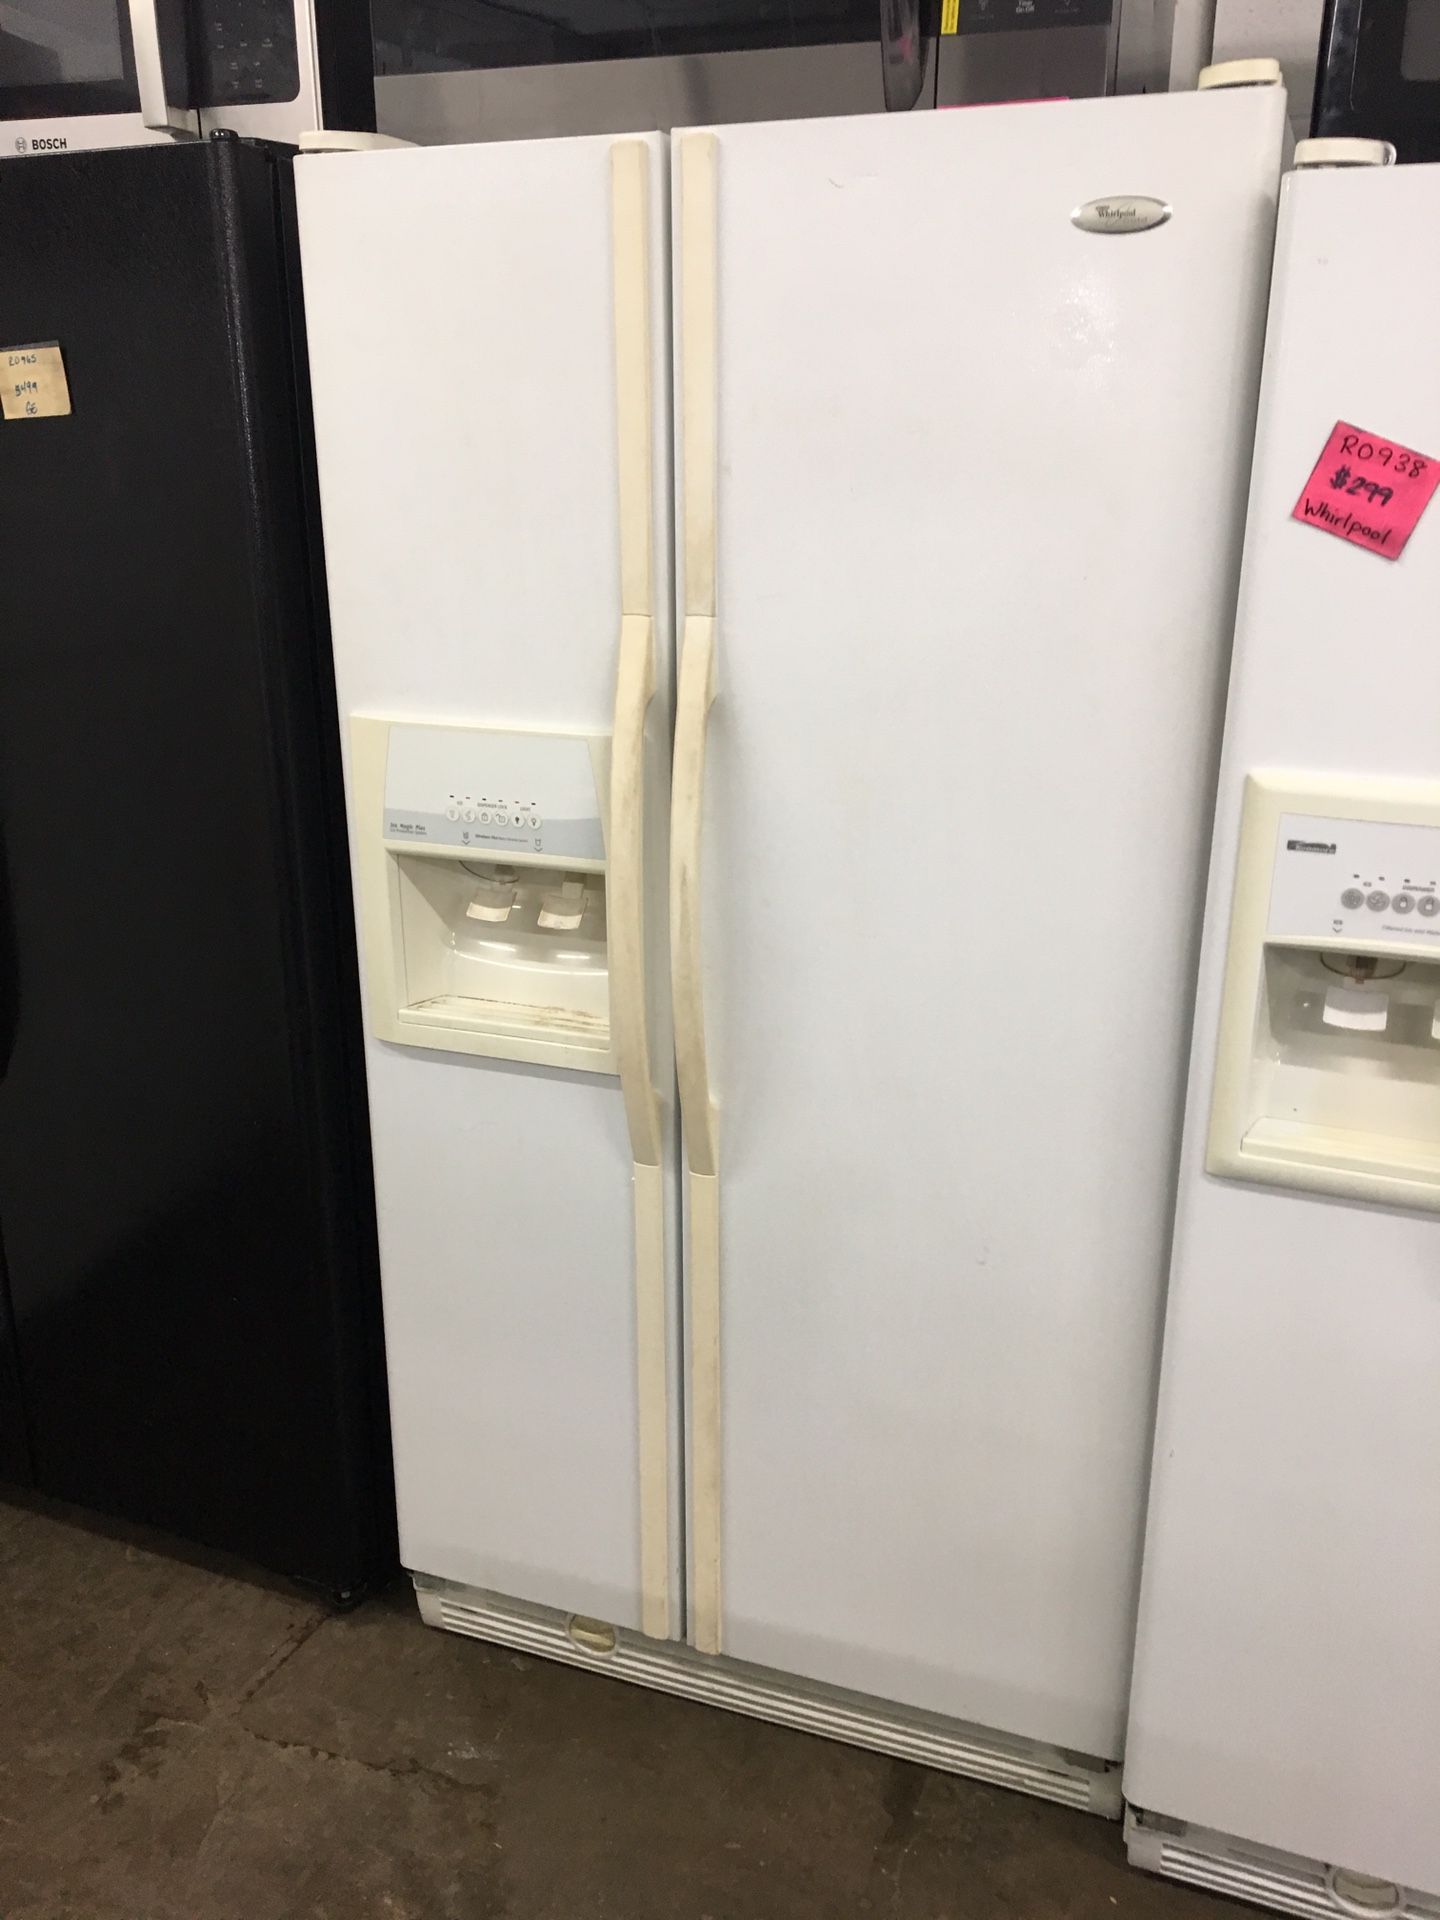 Guaranteed Refurbished White side-by-side refrigerator with water and ice dispenser